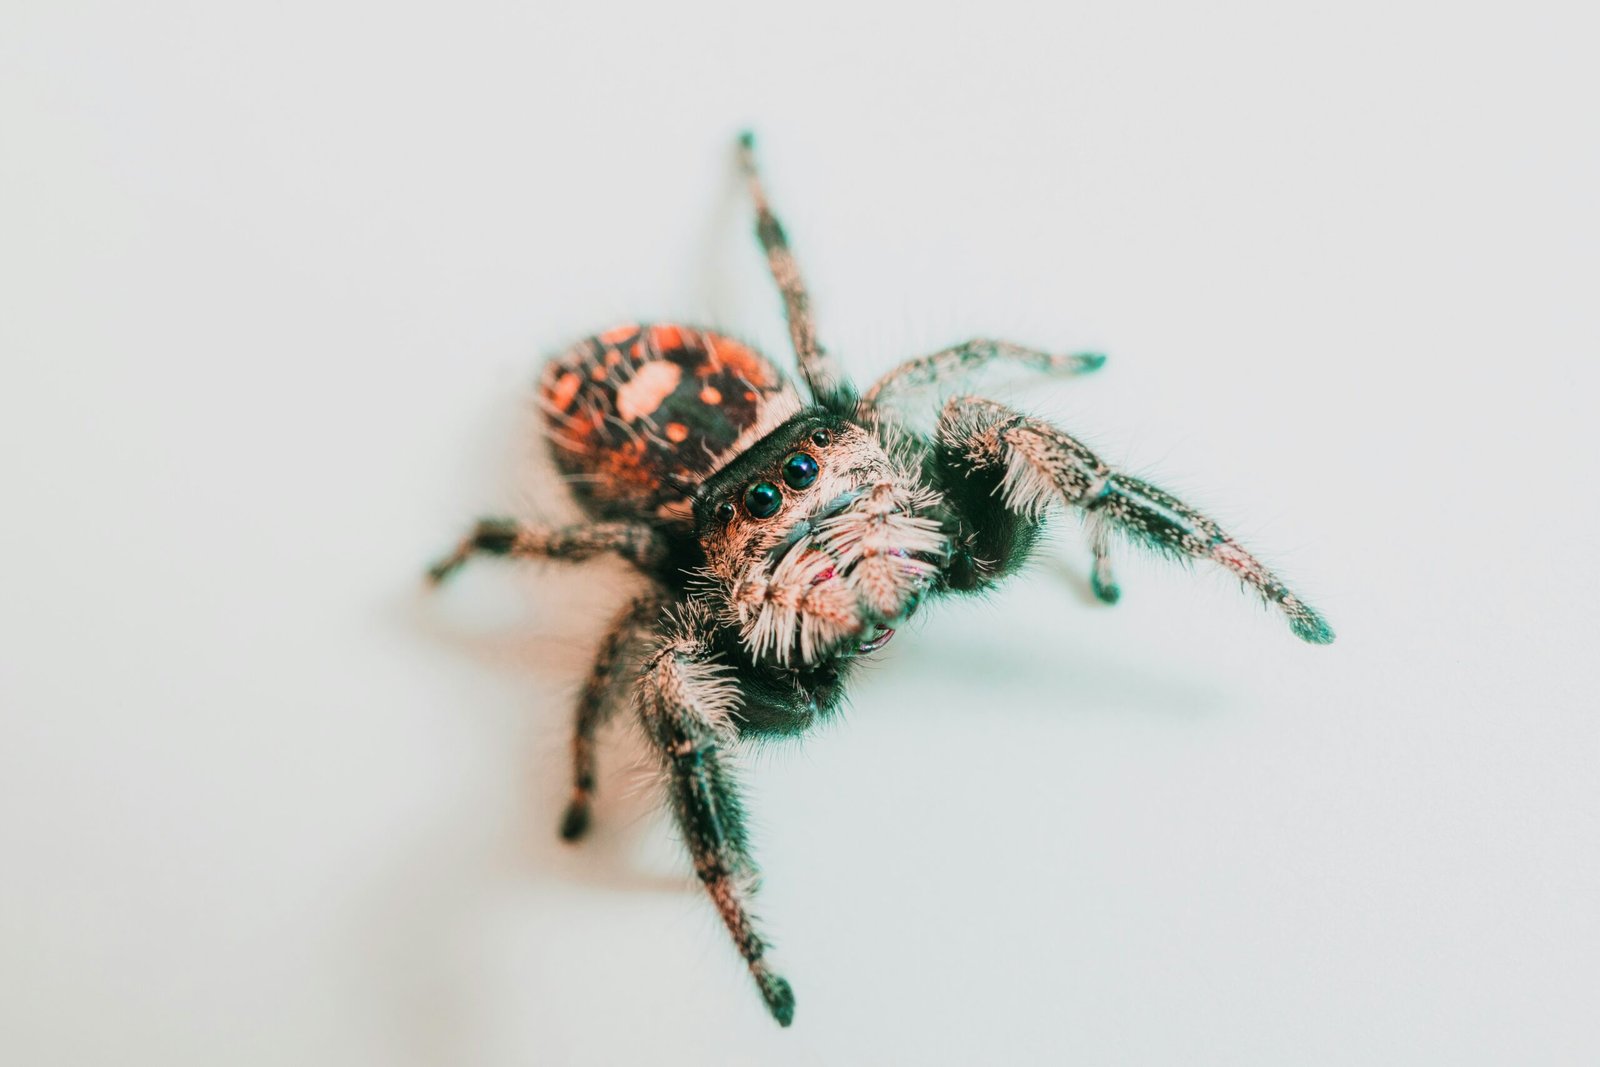 What Are The Behavioral Traits Of The Impressive Regal Jumping Spider, And How Is It Cared For In Captivity?